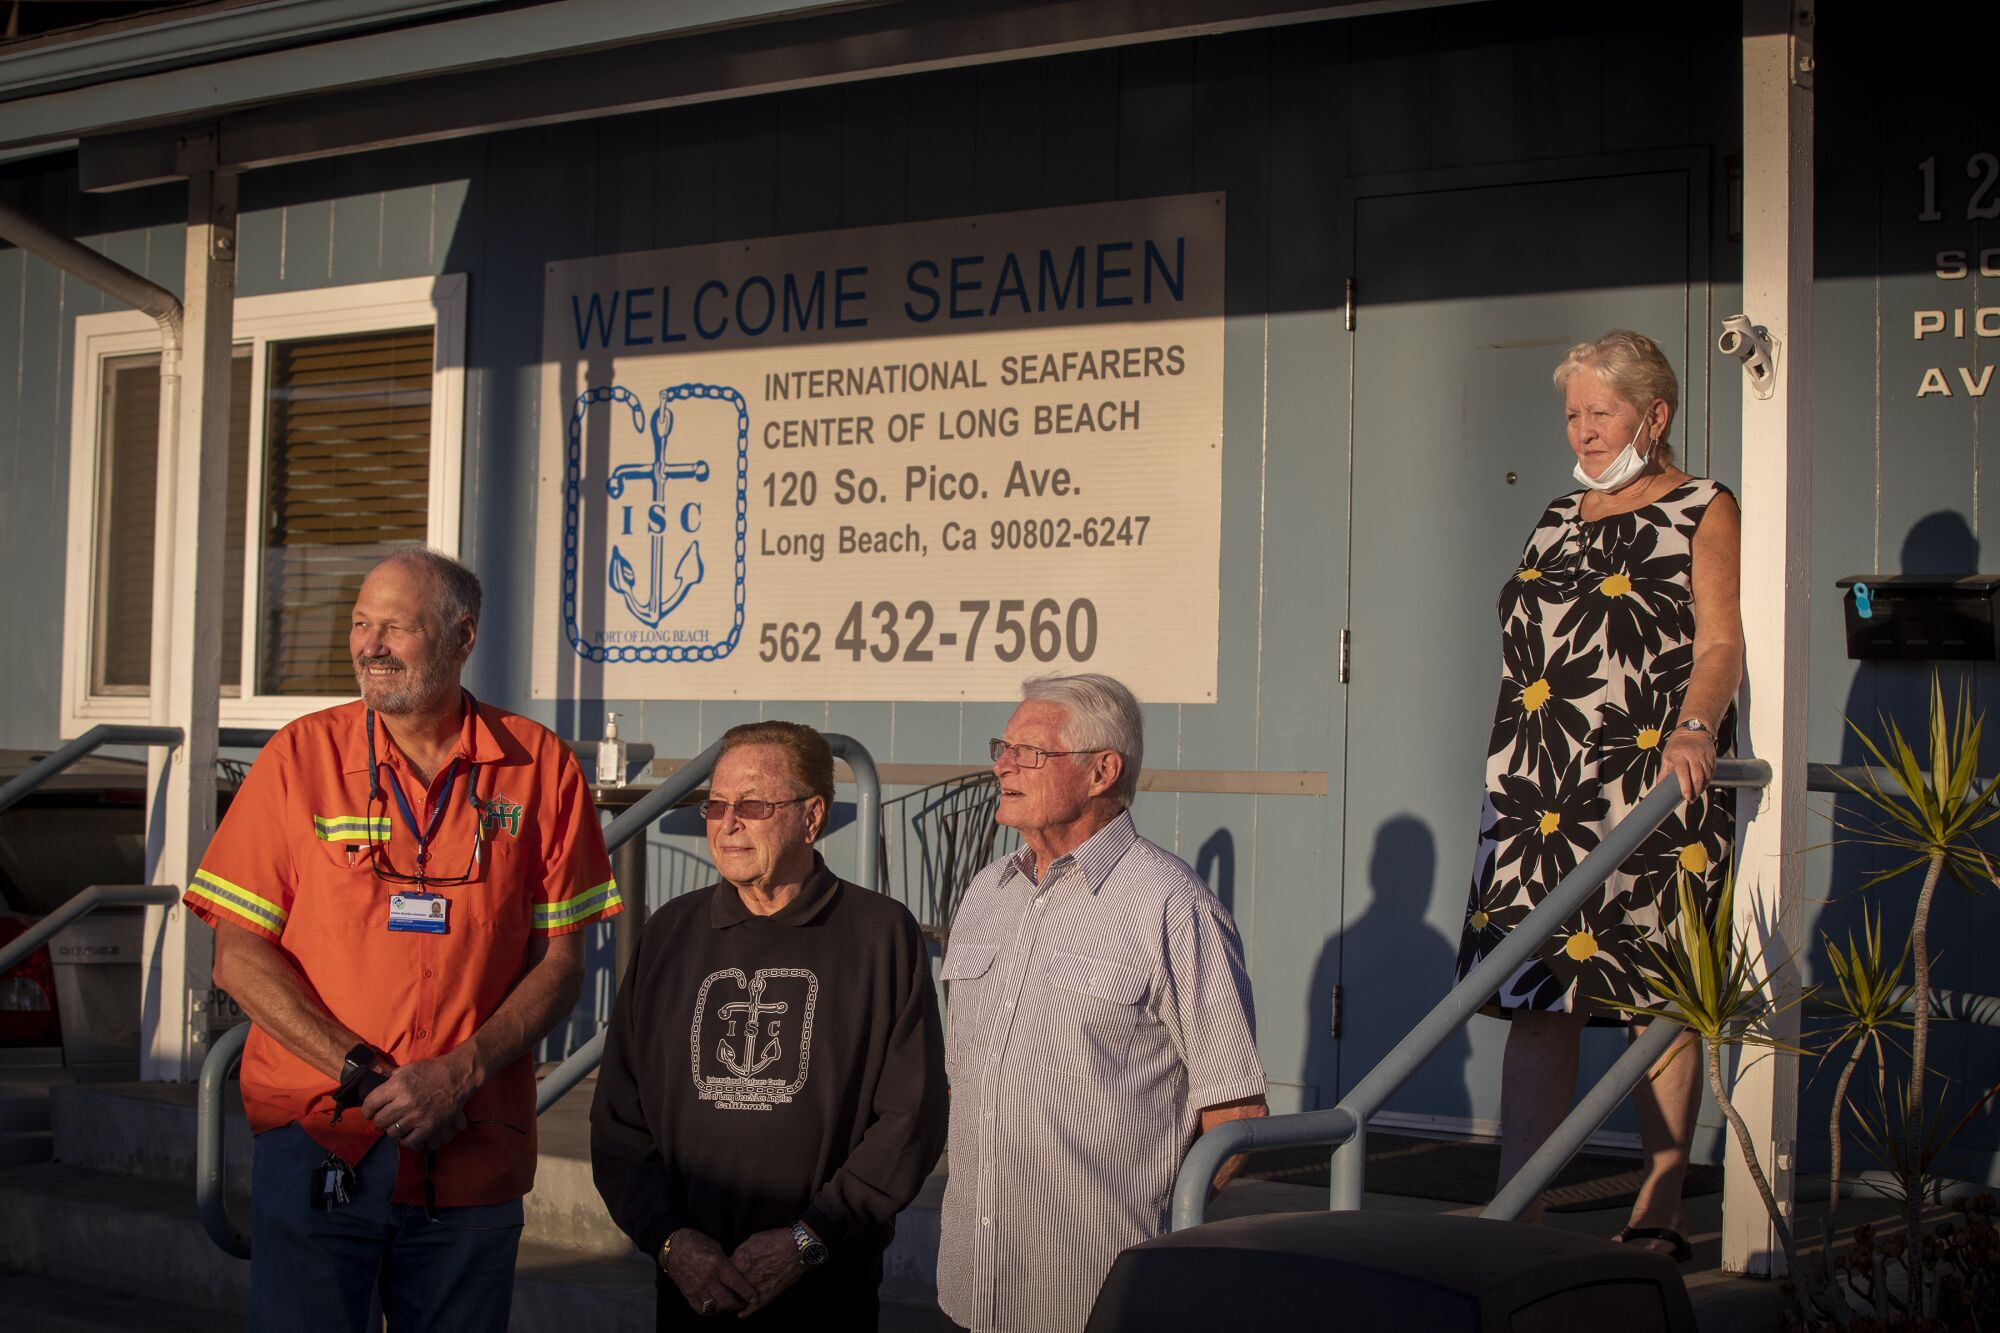 This photo shows four people standing in front of the International Seafarers Center